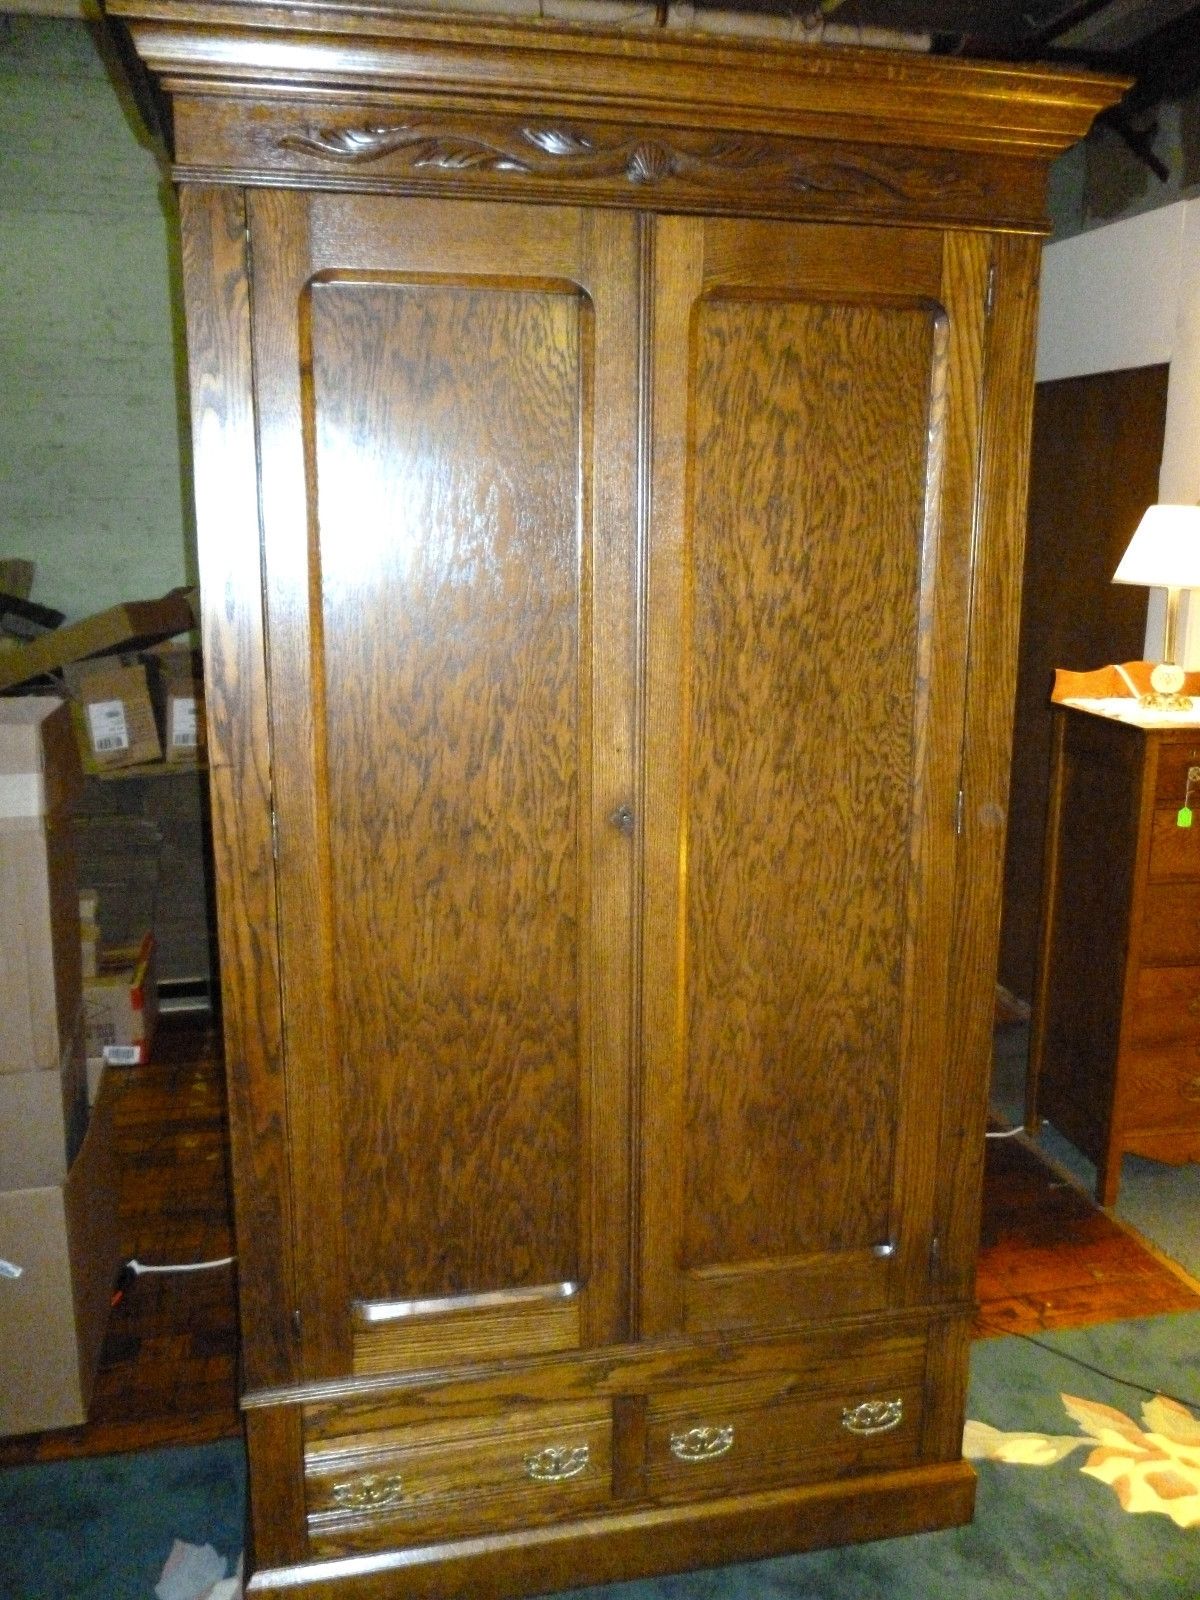 Oak Wardrobes With Drawers And Shelves Within Most Recent Antique Oak Wardrobe Armoire W/ Drawers, Shelves Refinished (View 13 of 15)